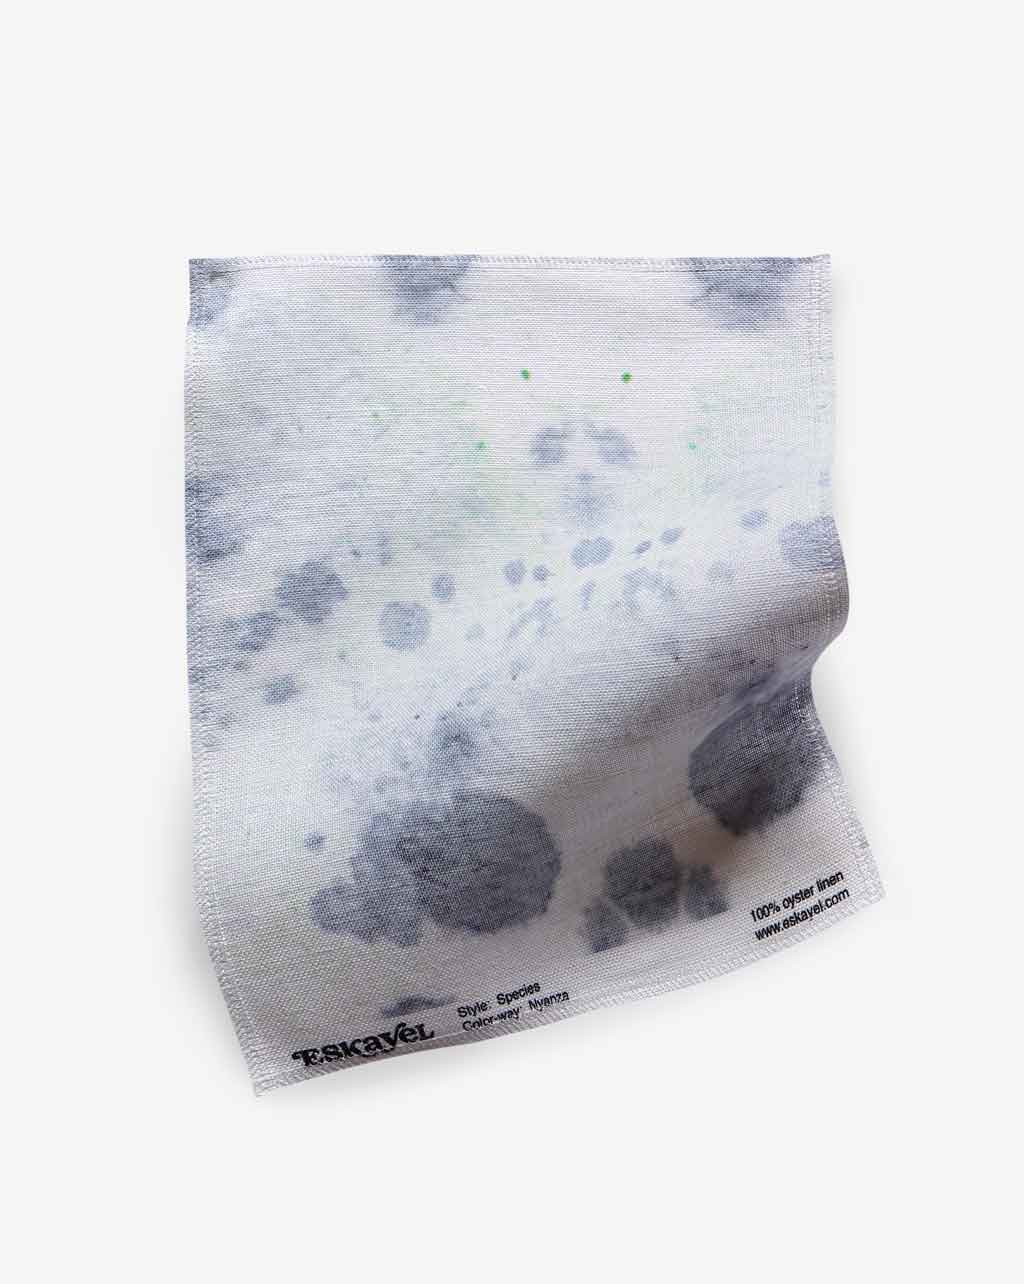 A Species Fabric with black spots on it, creating a kaleidoscopic effect